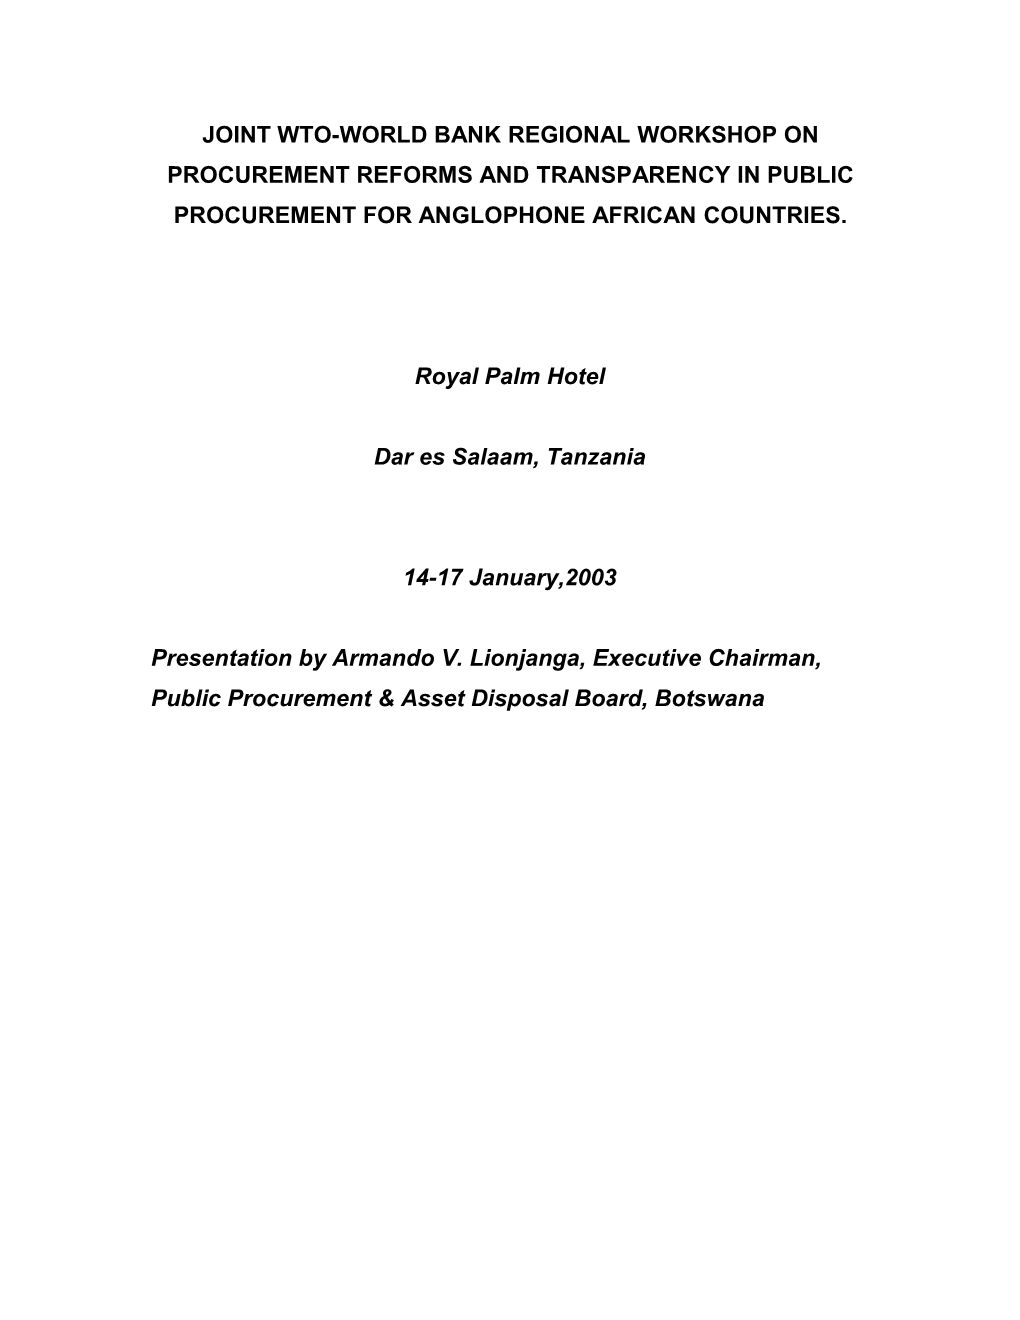 Joint Wto-World Bank Regional Workshop on Procurement Reforms and Transparency in Public